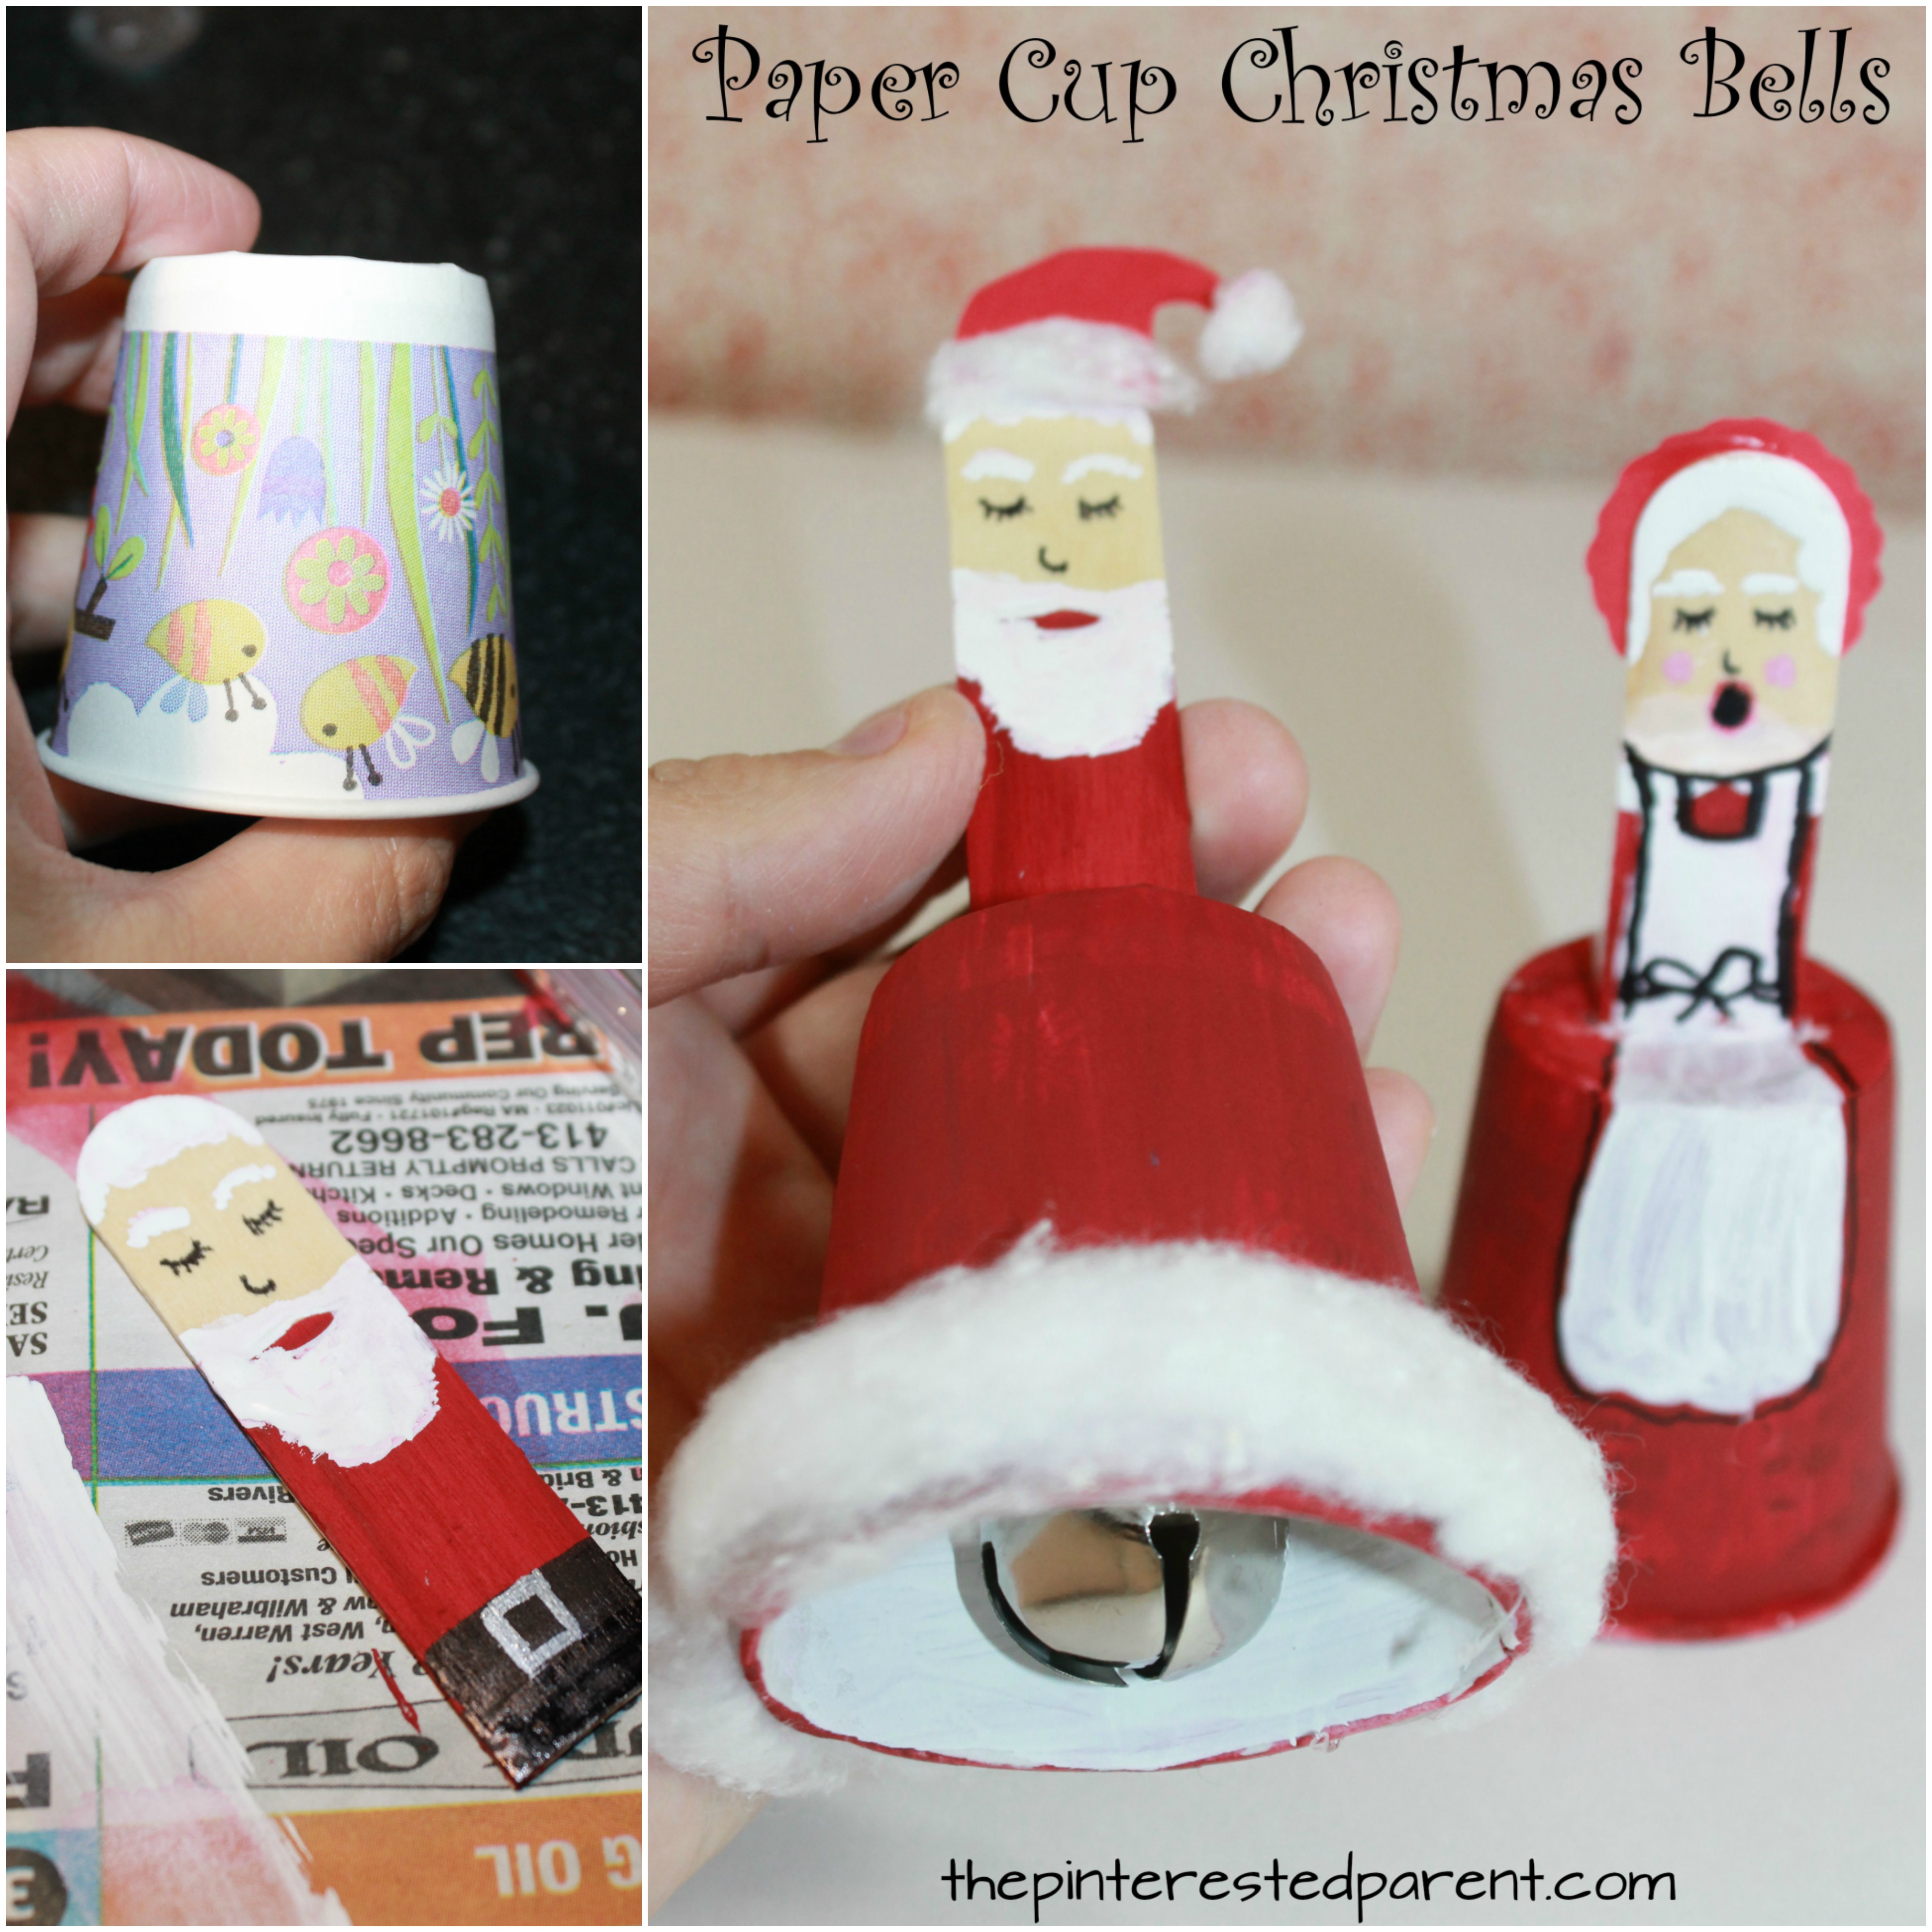 Dixie Cup Christmas Bells - Christmas and winter arts and crafts for kids. See out Santa and angel bells